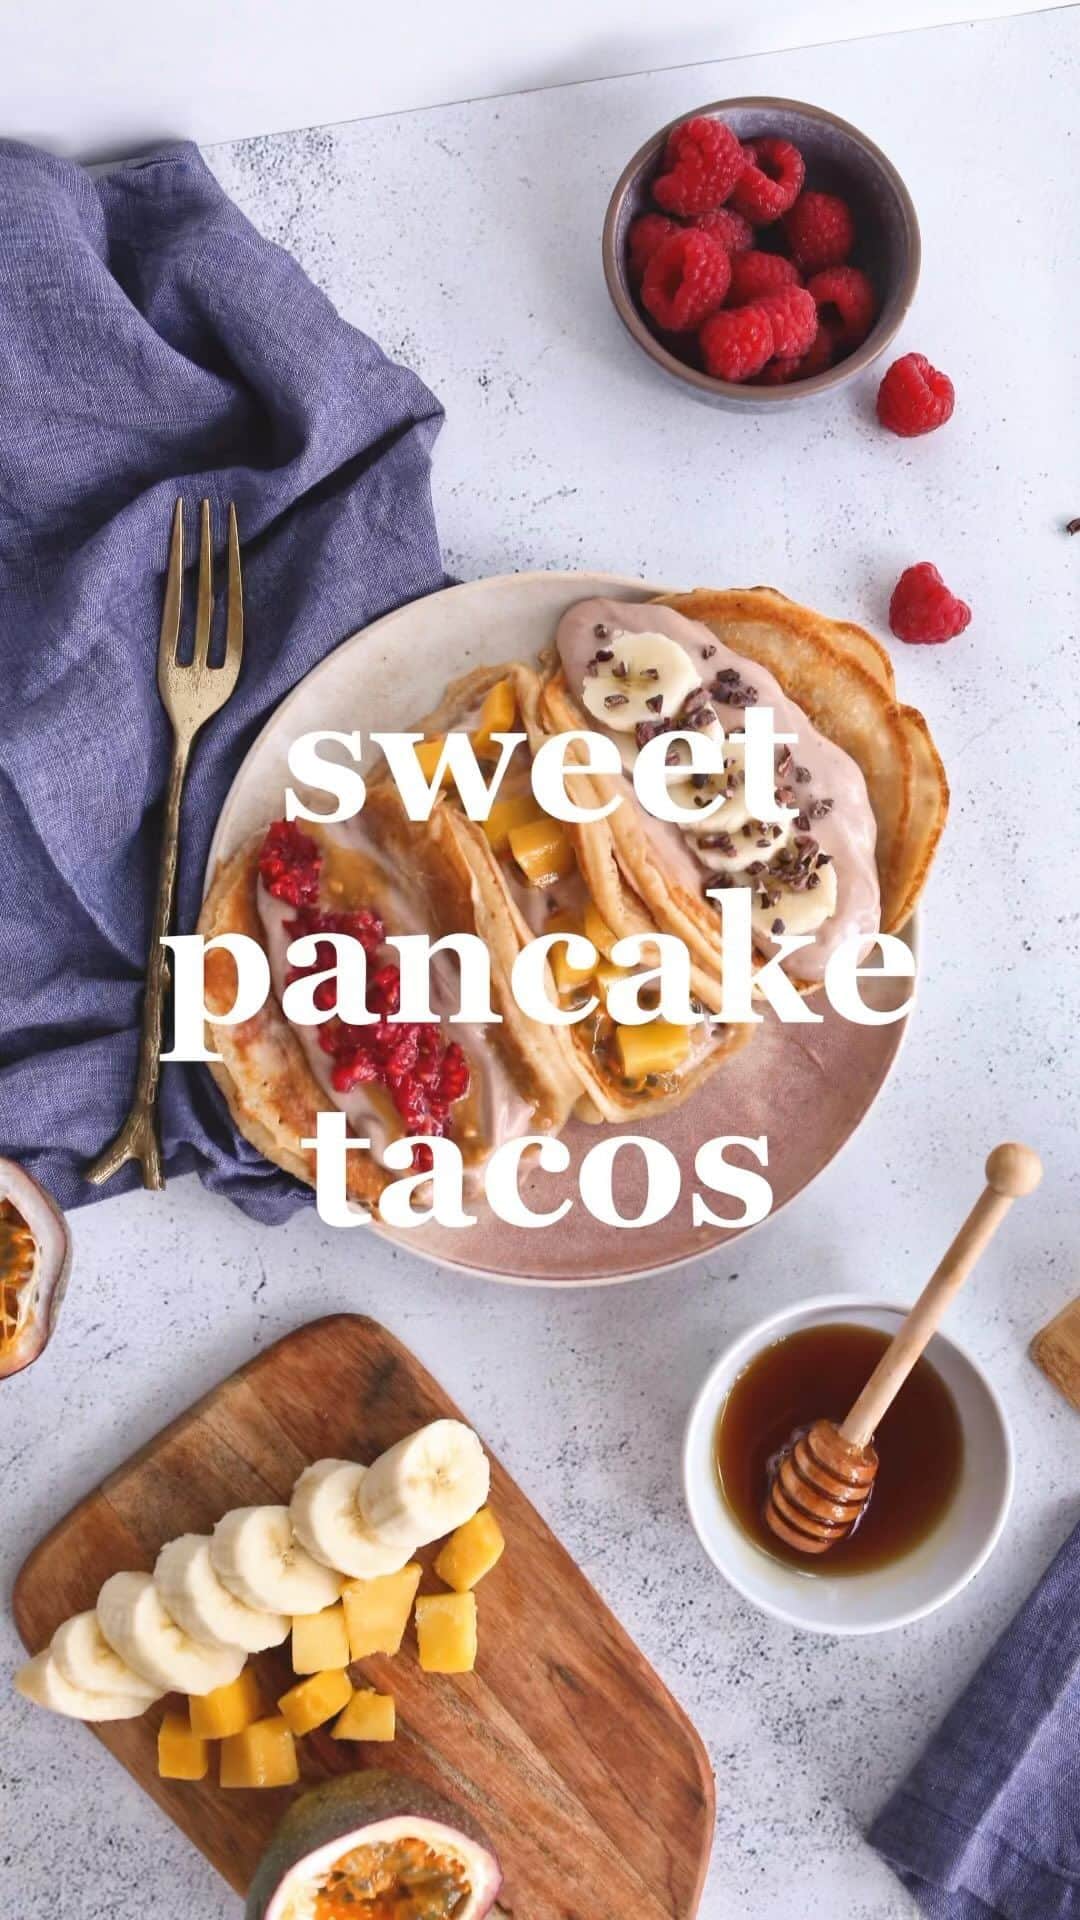 Amanda Biskのインスタグラム：「BREAKFAST PANCAKE TACOS 🥞 well if this doesn’t get you excited to get out of bed, I don’t know what will!! 🤤  Full recipe is now live on the #freshbodyfitmind app 🙌🏼 plus you’ll find 100+ plant based recipes for FREE!! All designed by our superstar @annielonglife 💚🌱  www.freshbodyfitmind.com/recipes」